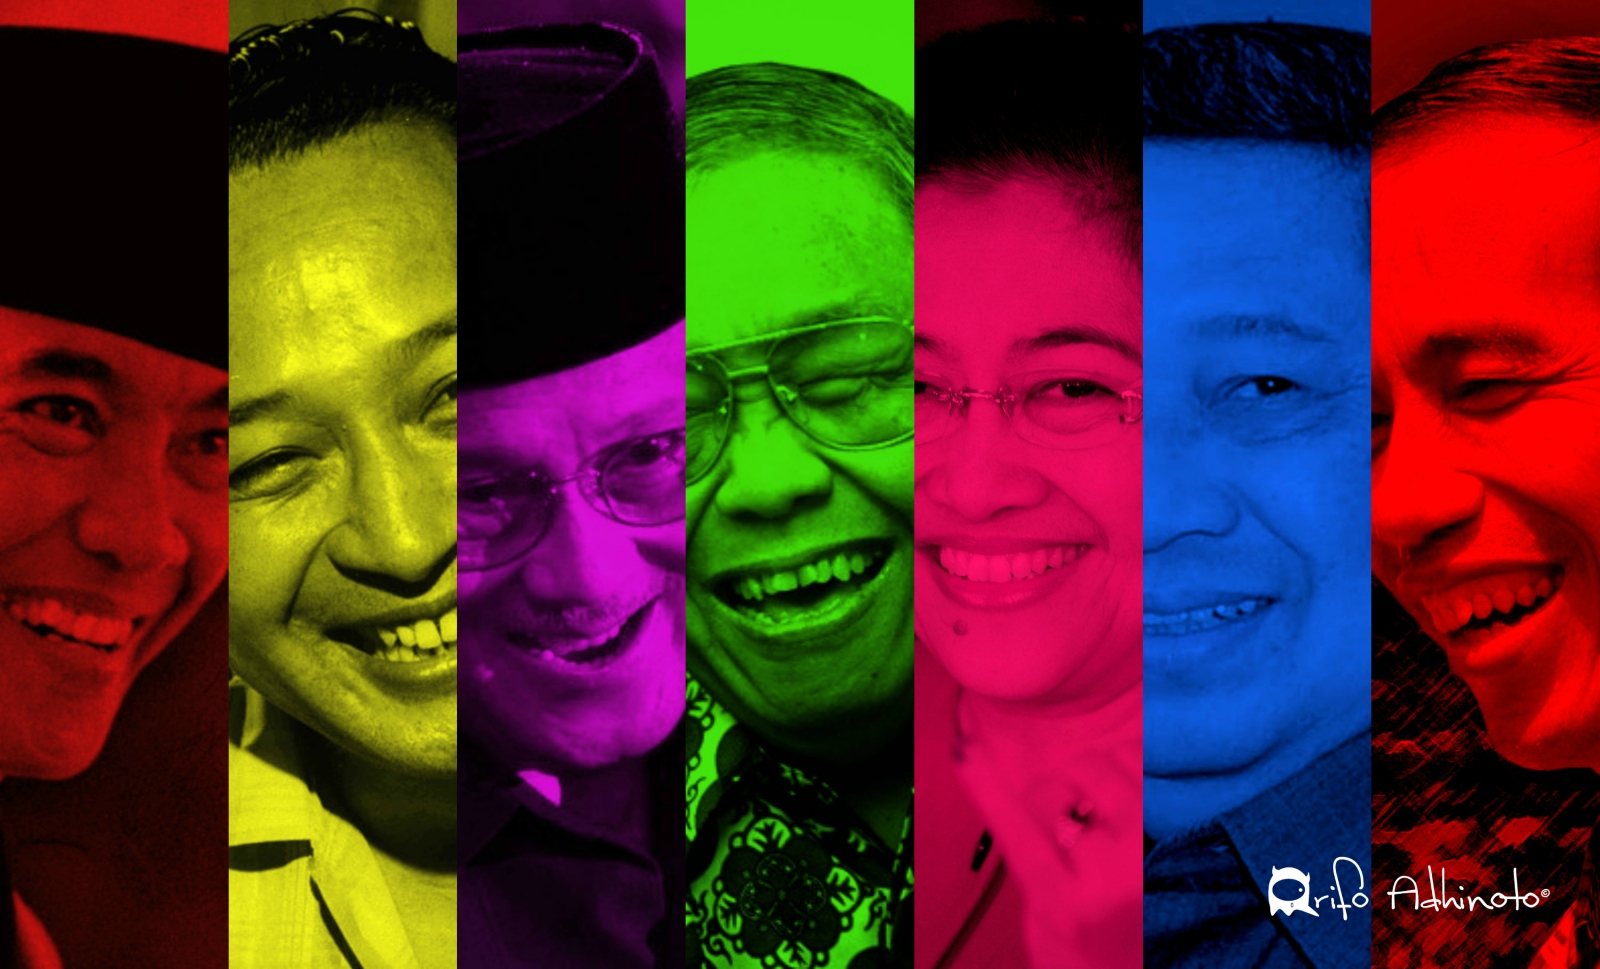 The Presidents of Republic of Indonesia 